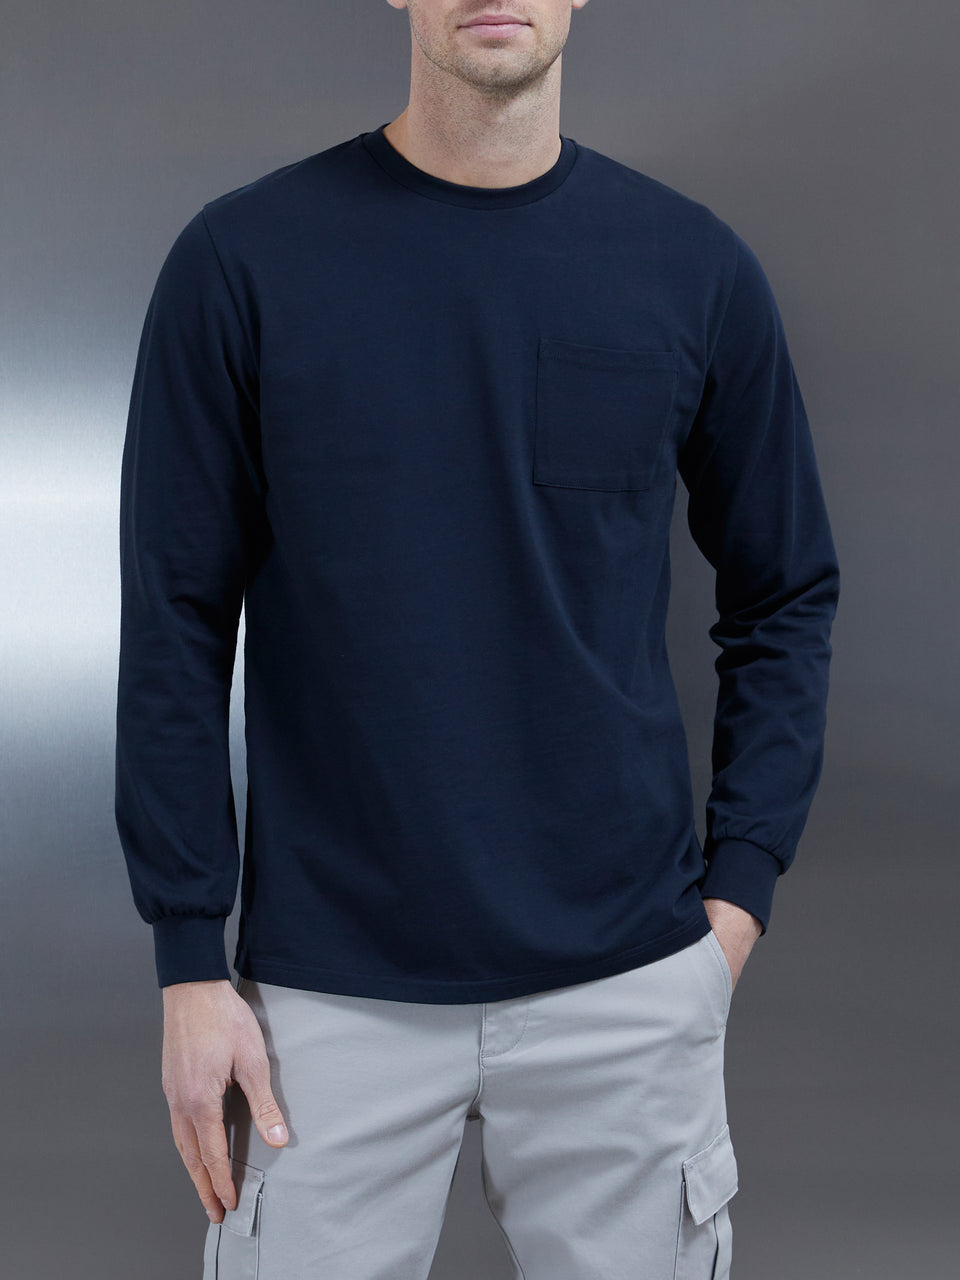 Cotton Pocket Long Sleeve T-Shirt in Navy